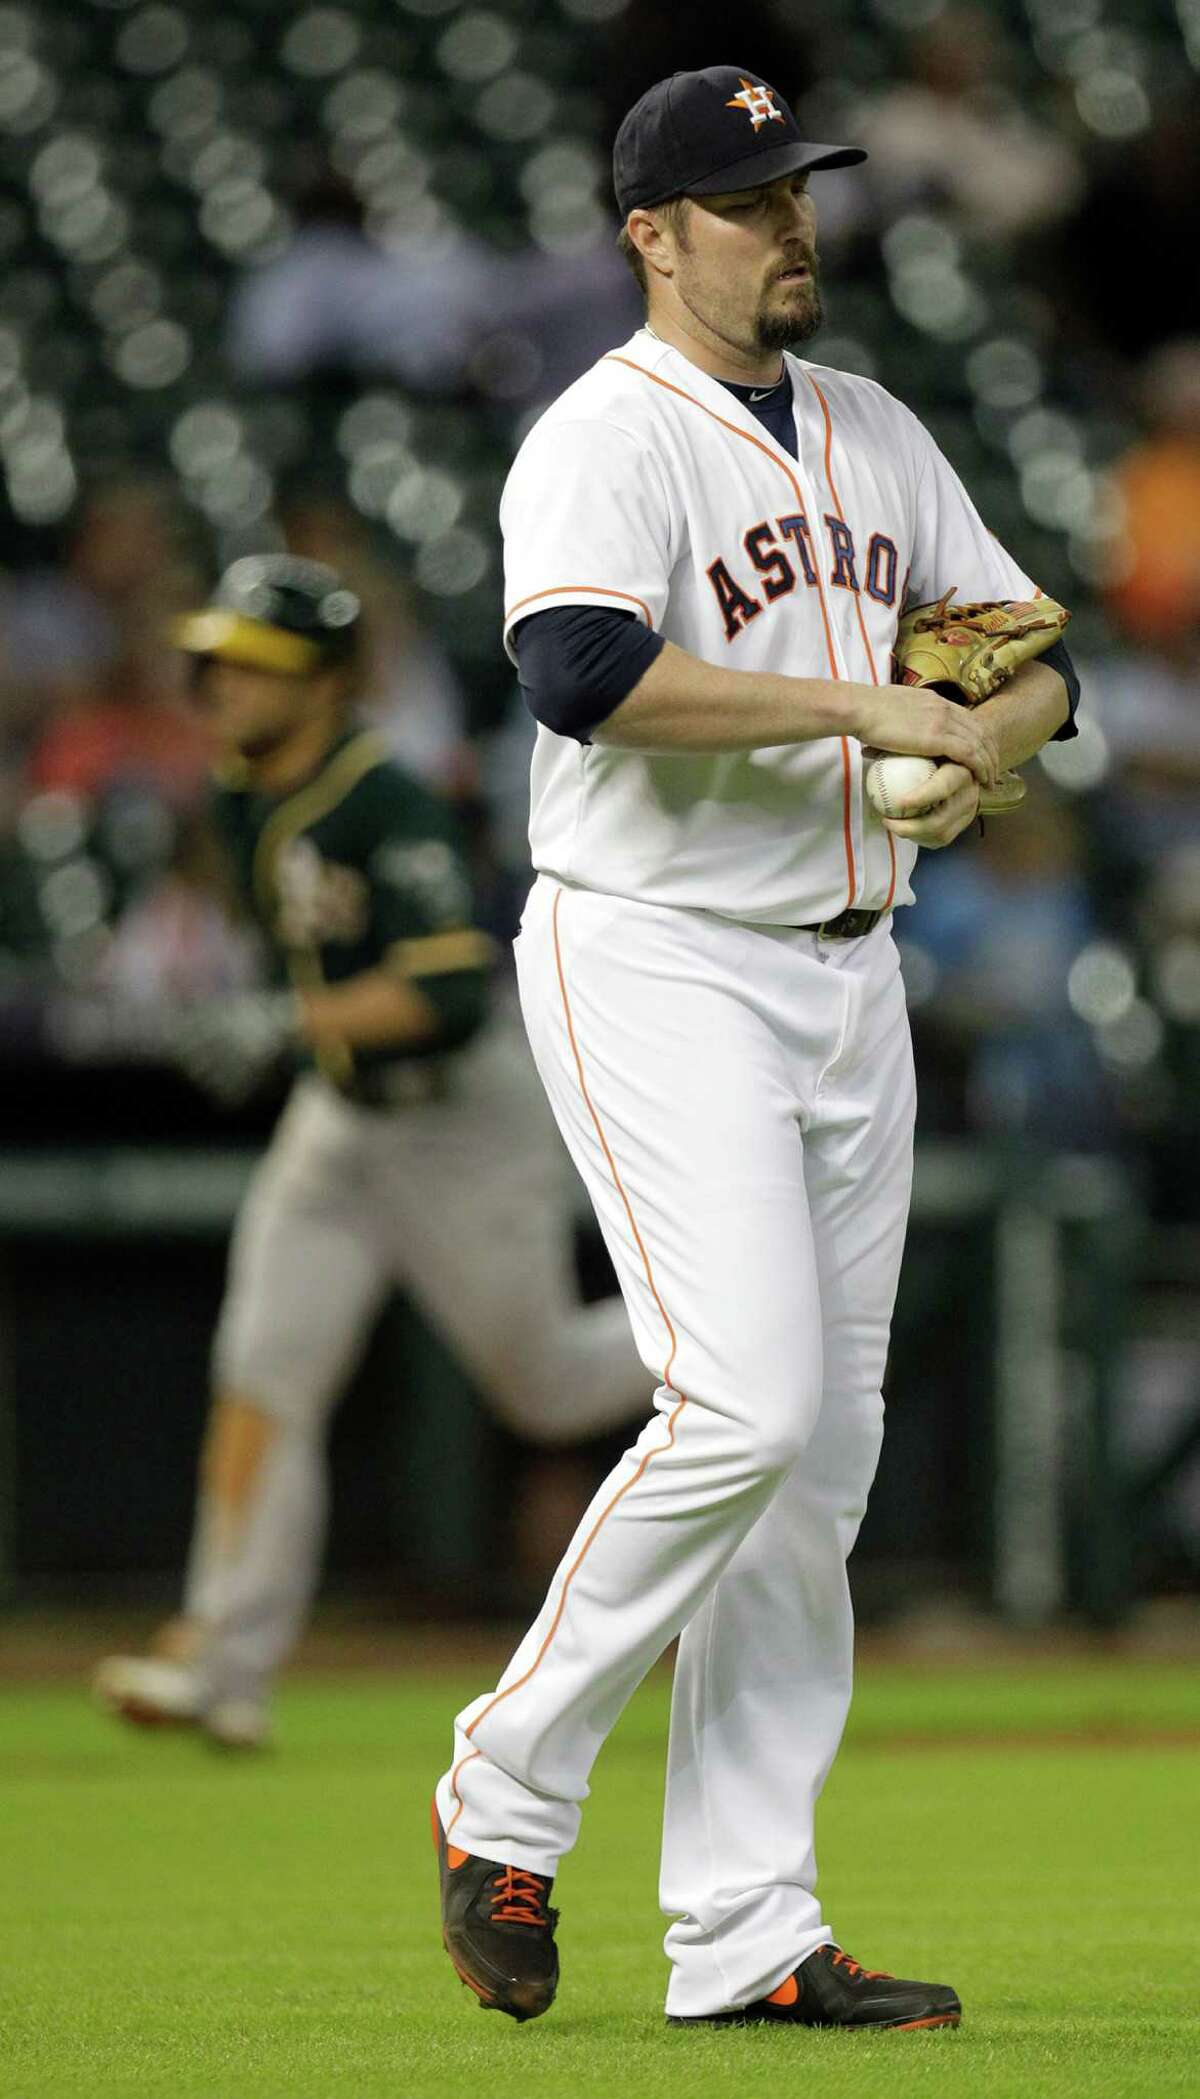 Houston Astros pitcher Chad Qualls walks to mound as Oakland Athletics Sam Fuld rounds the bases on his two run home run during the 9th inning at Minute Maid Park Wednesday, Aug. 27, 2014, in Houston. Coco Crisp also scored.